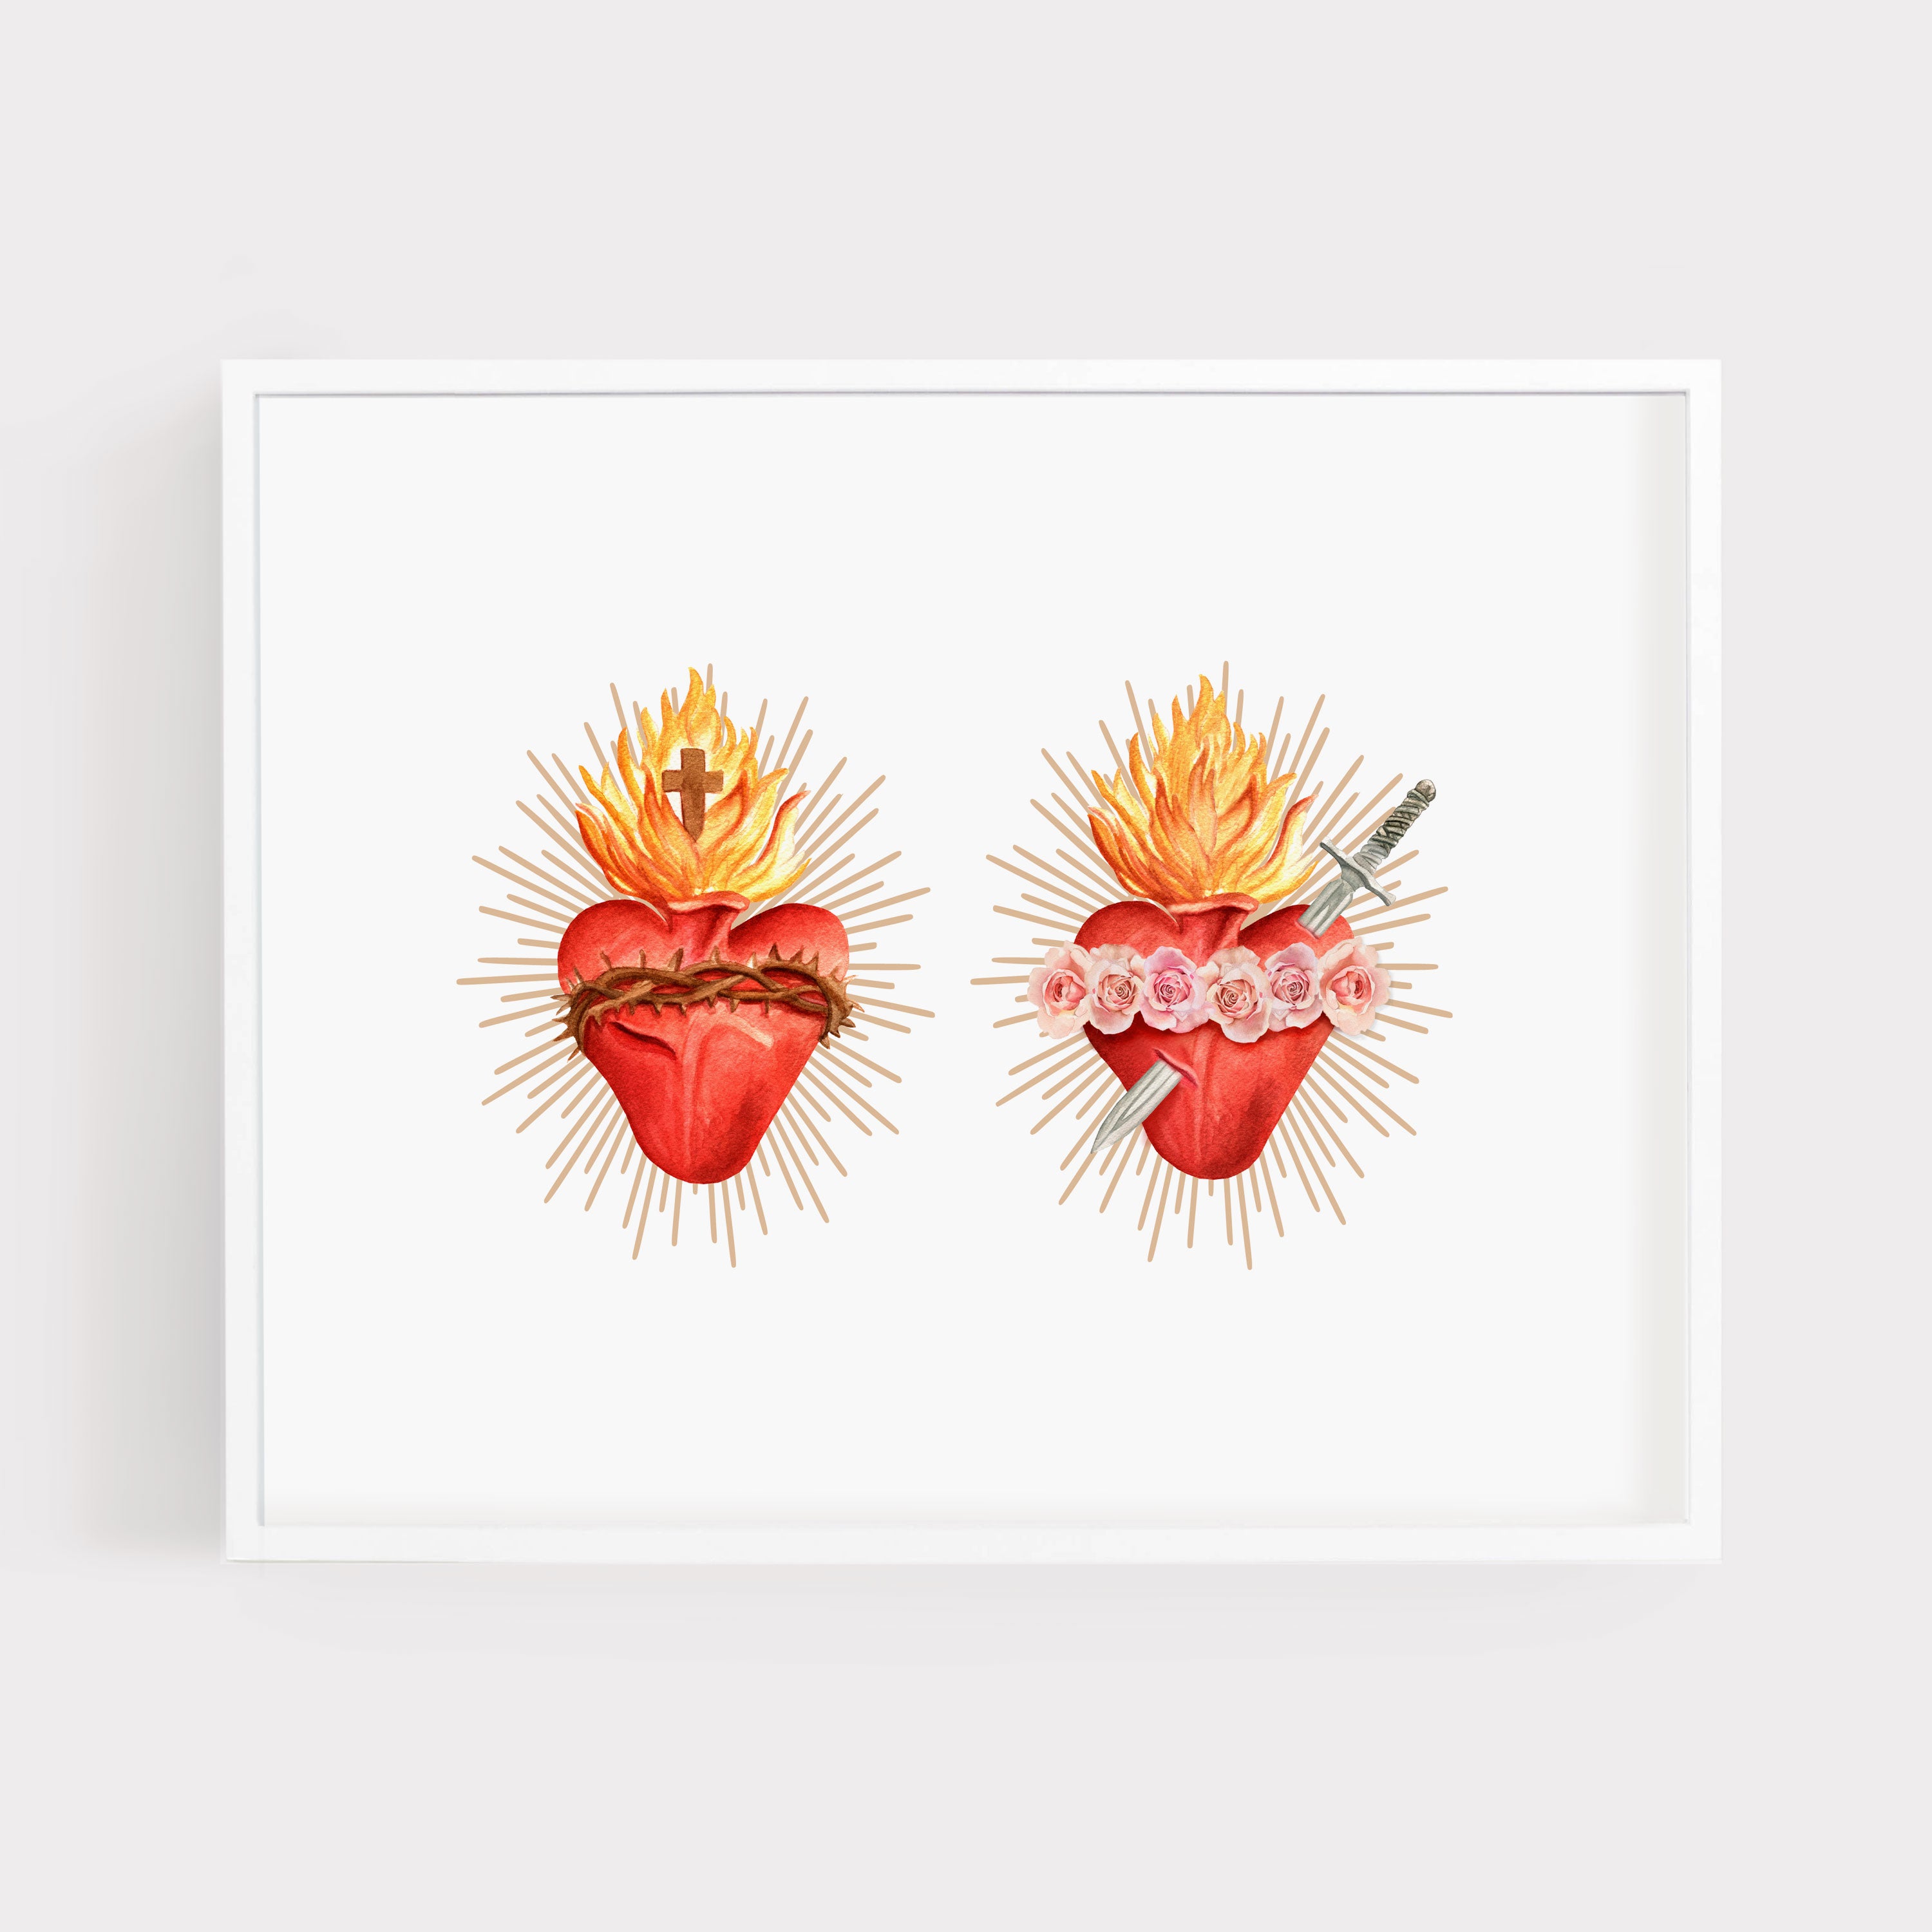 Sacred Heart of Jesus + Immaculate Heart of Mary | Art Print